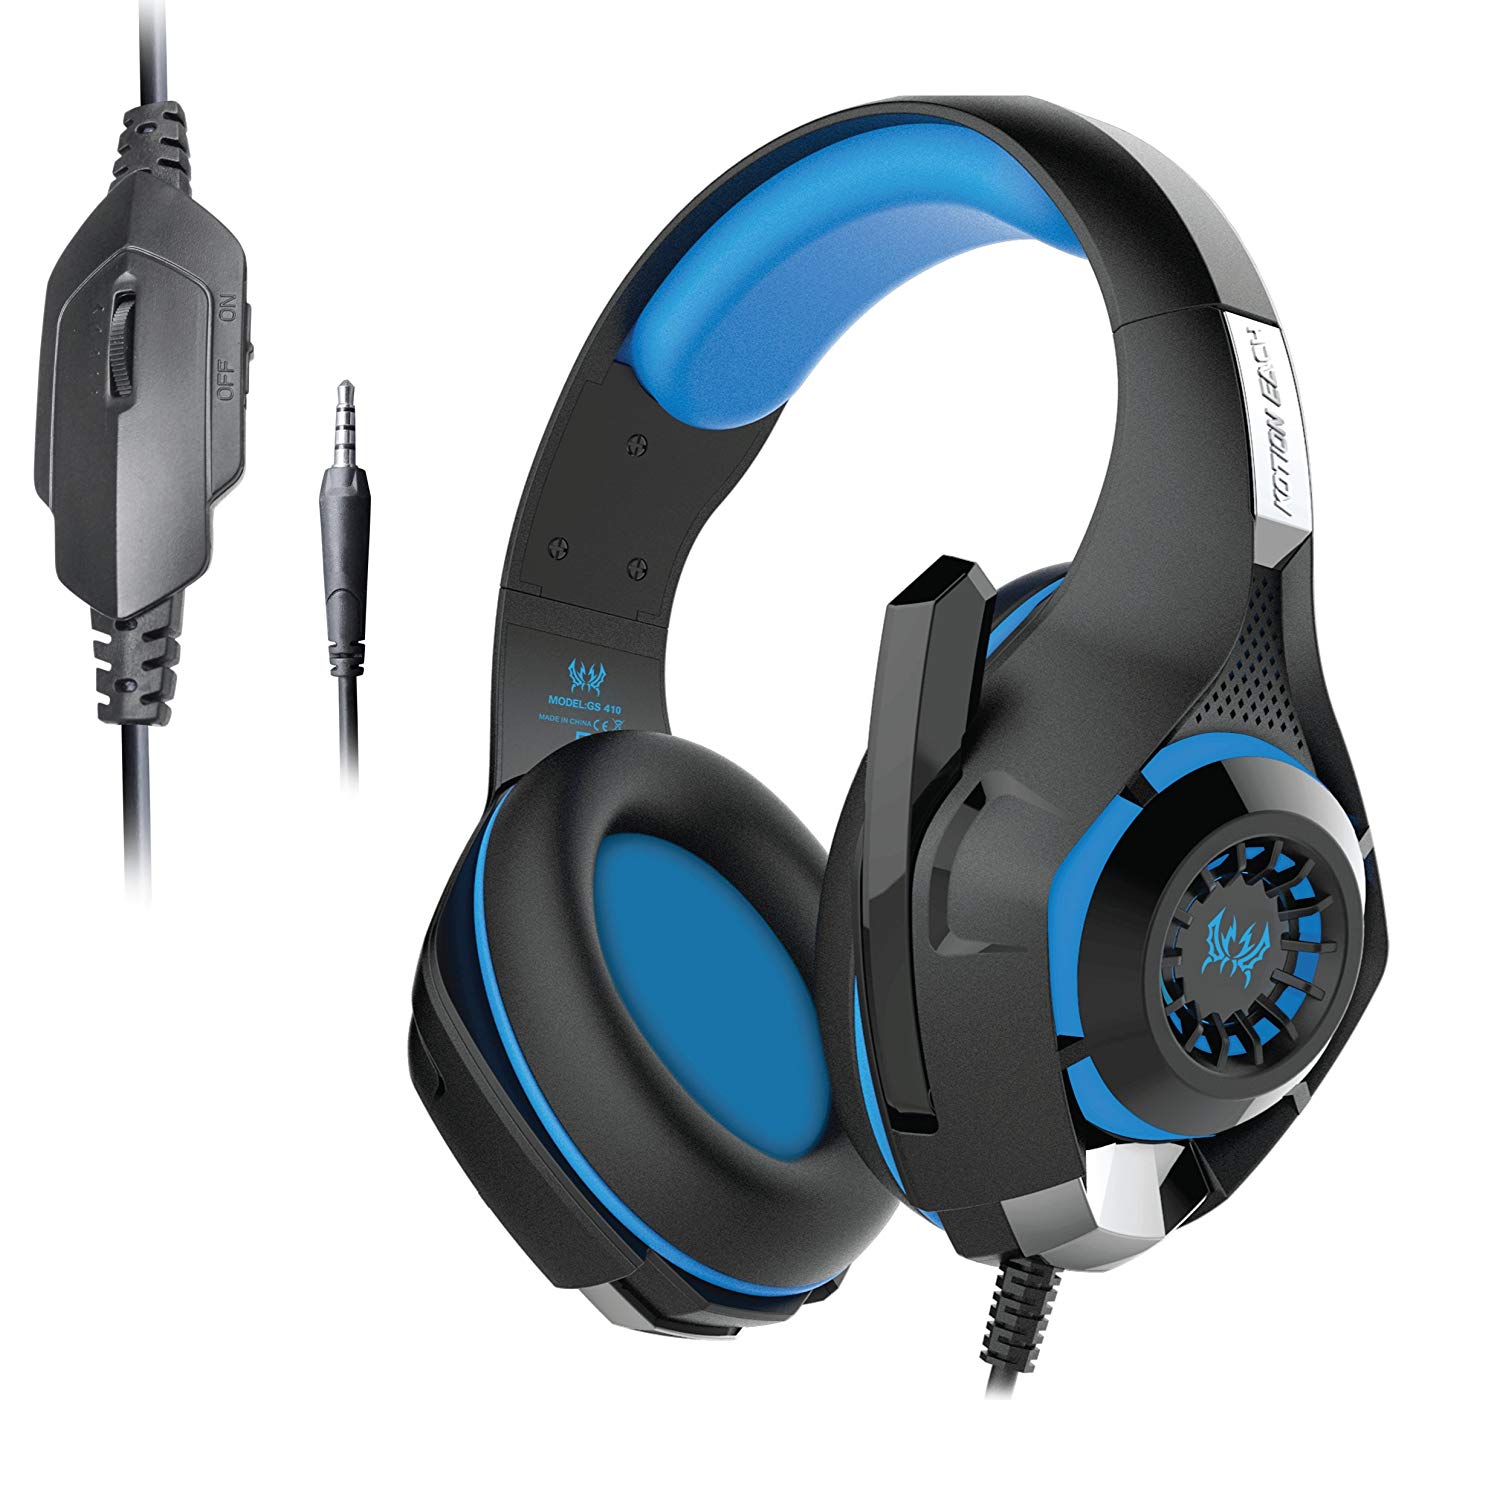 kotion each gs410 headphones with mic